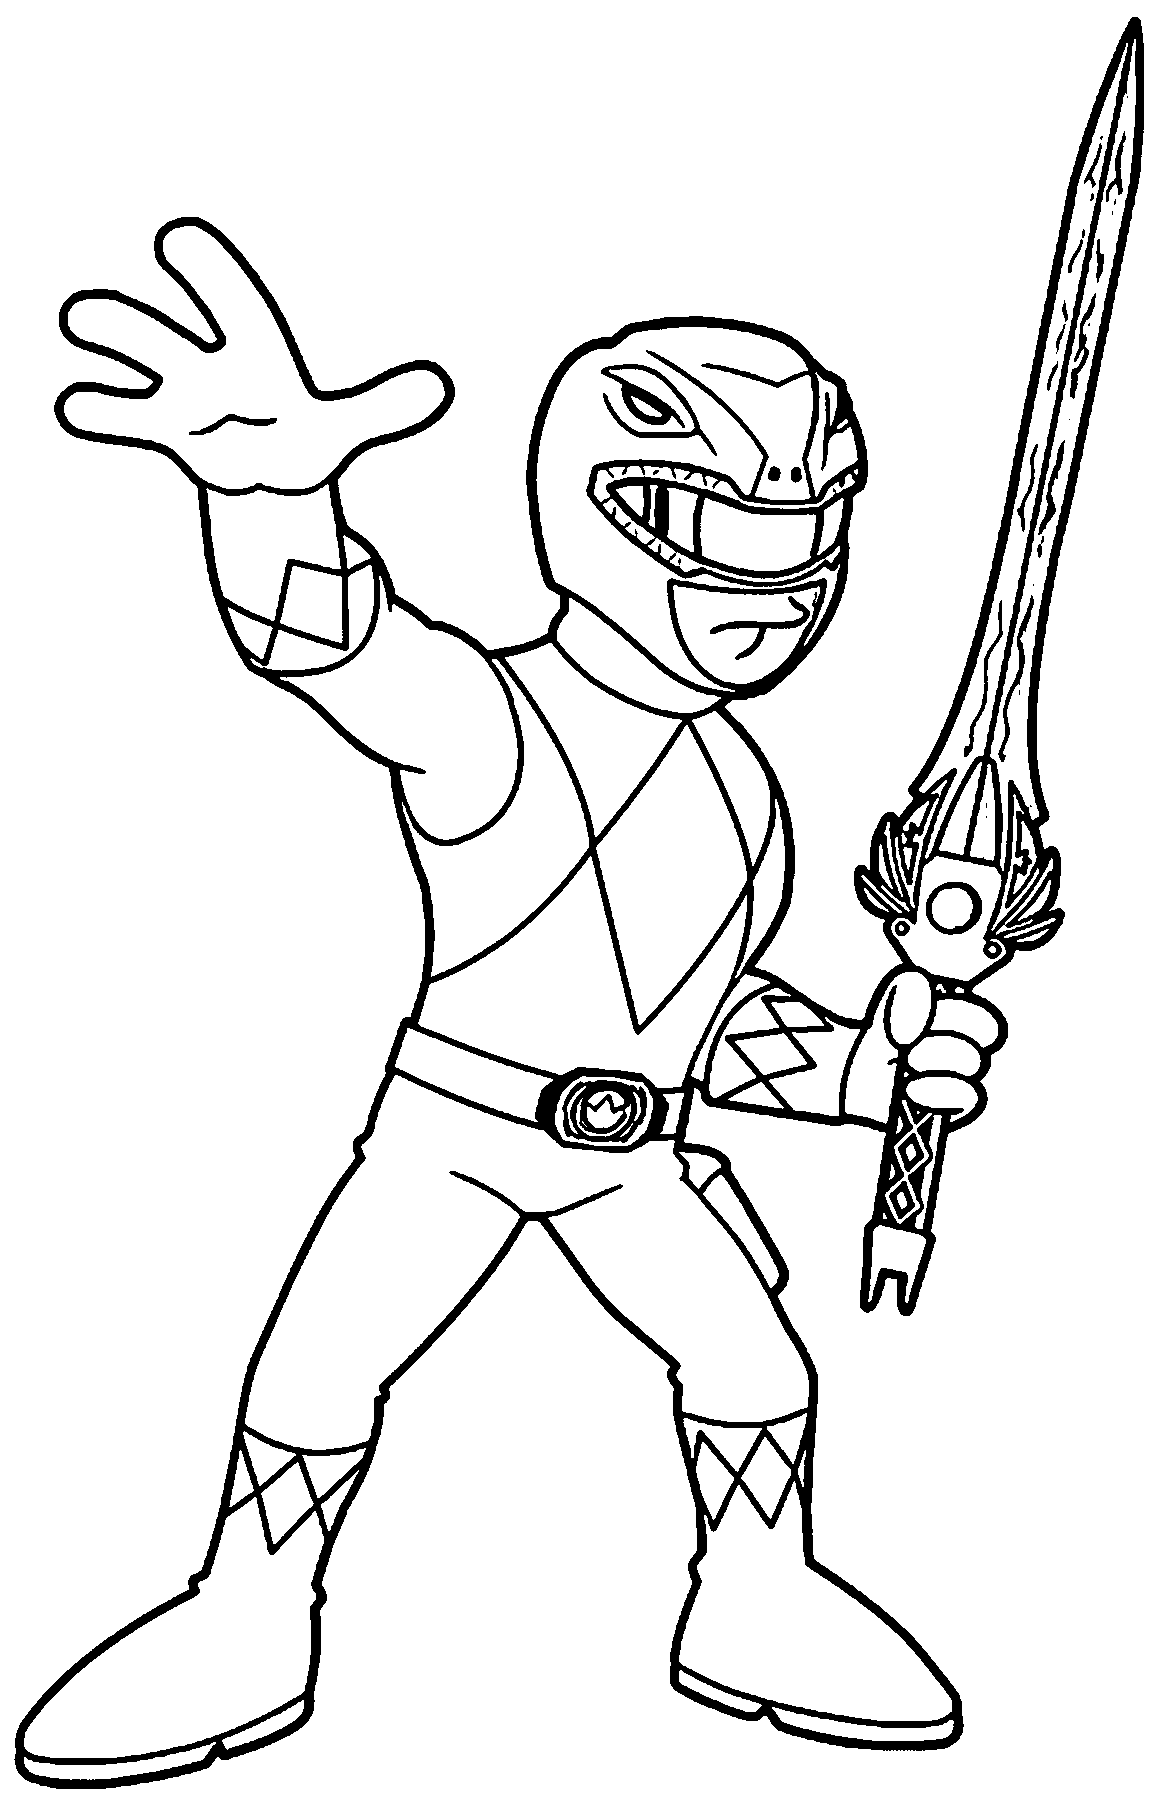 Mighty Morphin Power Rangers Red Ranger Coloring Page | Wecoloringpage